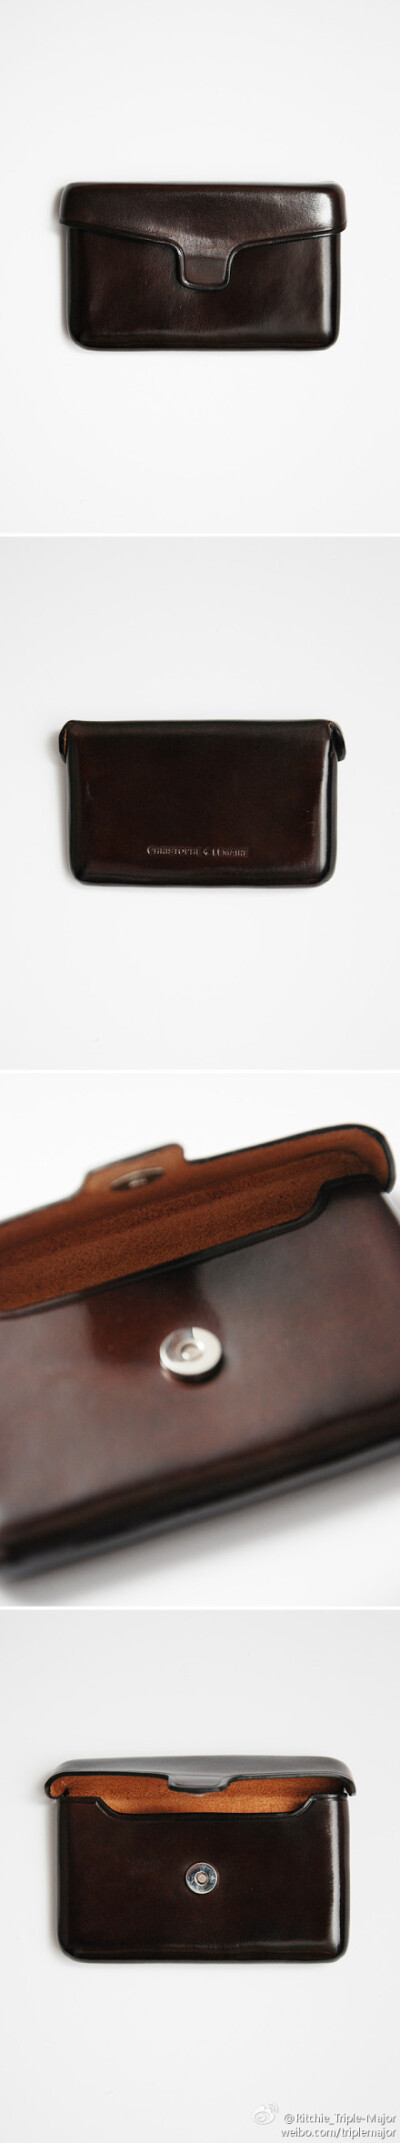 New Arrival: Christophe Lemaire Card Case (dark brown) http://t.cn/z8h0apW